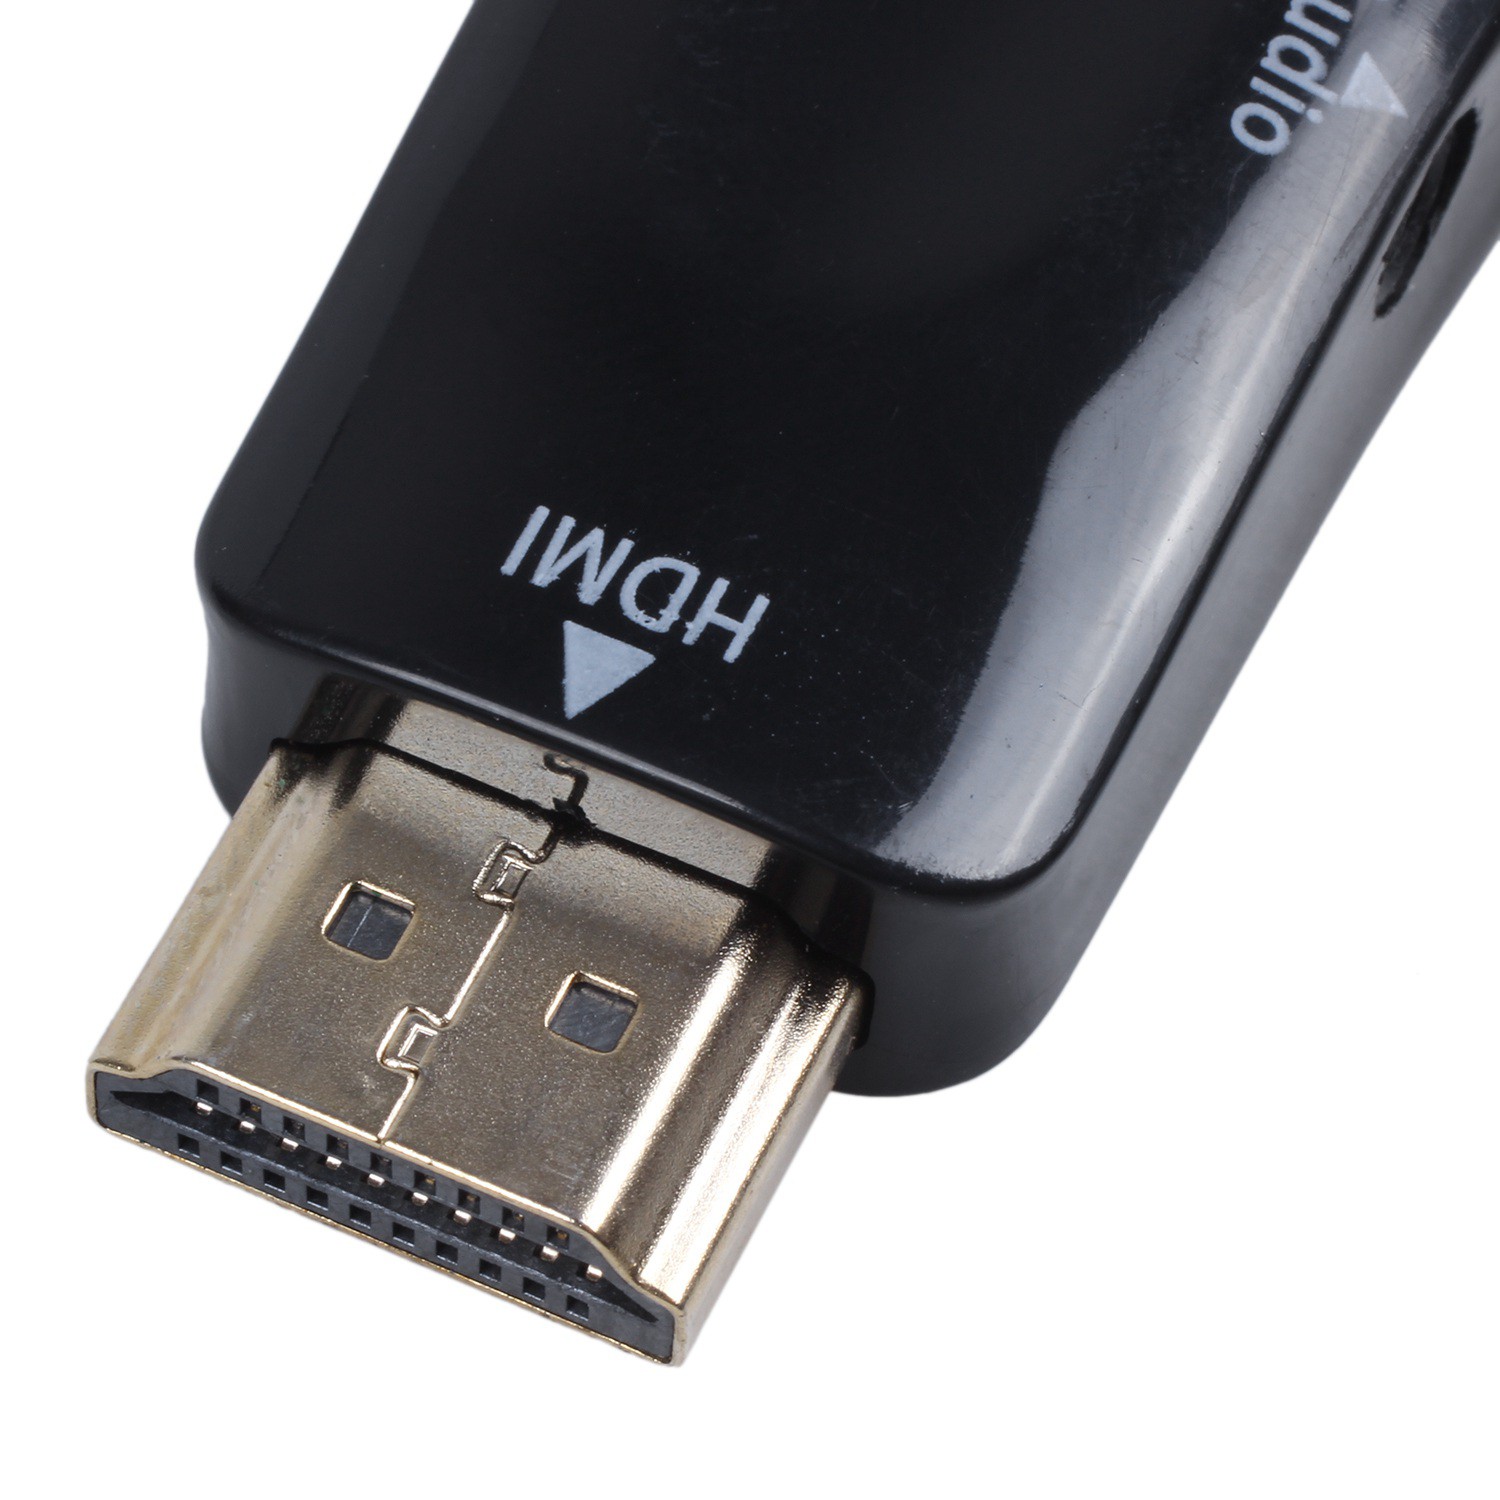 HDMI to VGA Converter Gold-plated with connector 3.5mm audio cable for PC, Laptop, DVD, Desktop, TV box or other HDMI input devices - Black